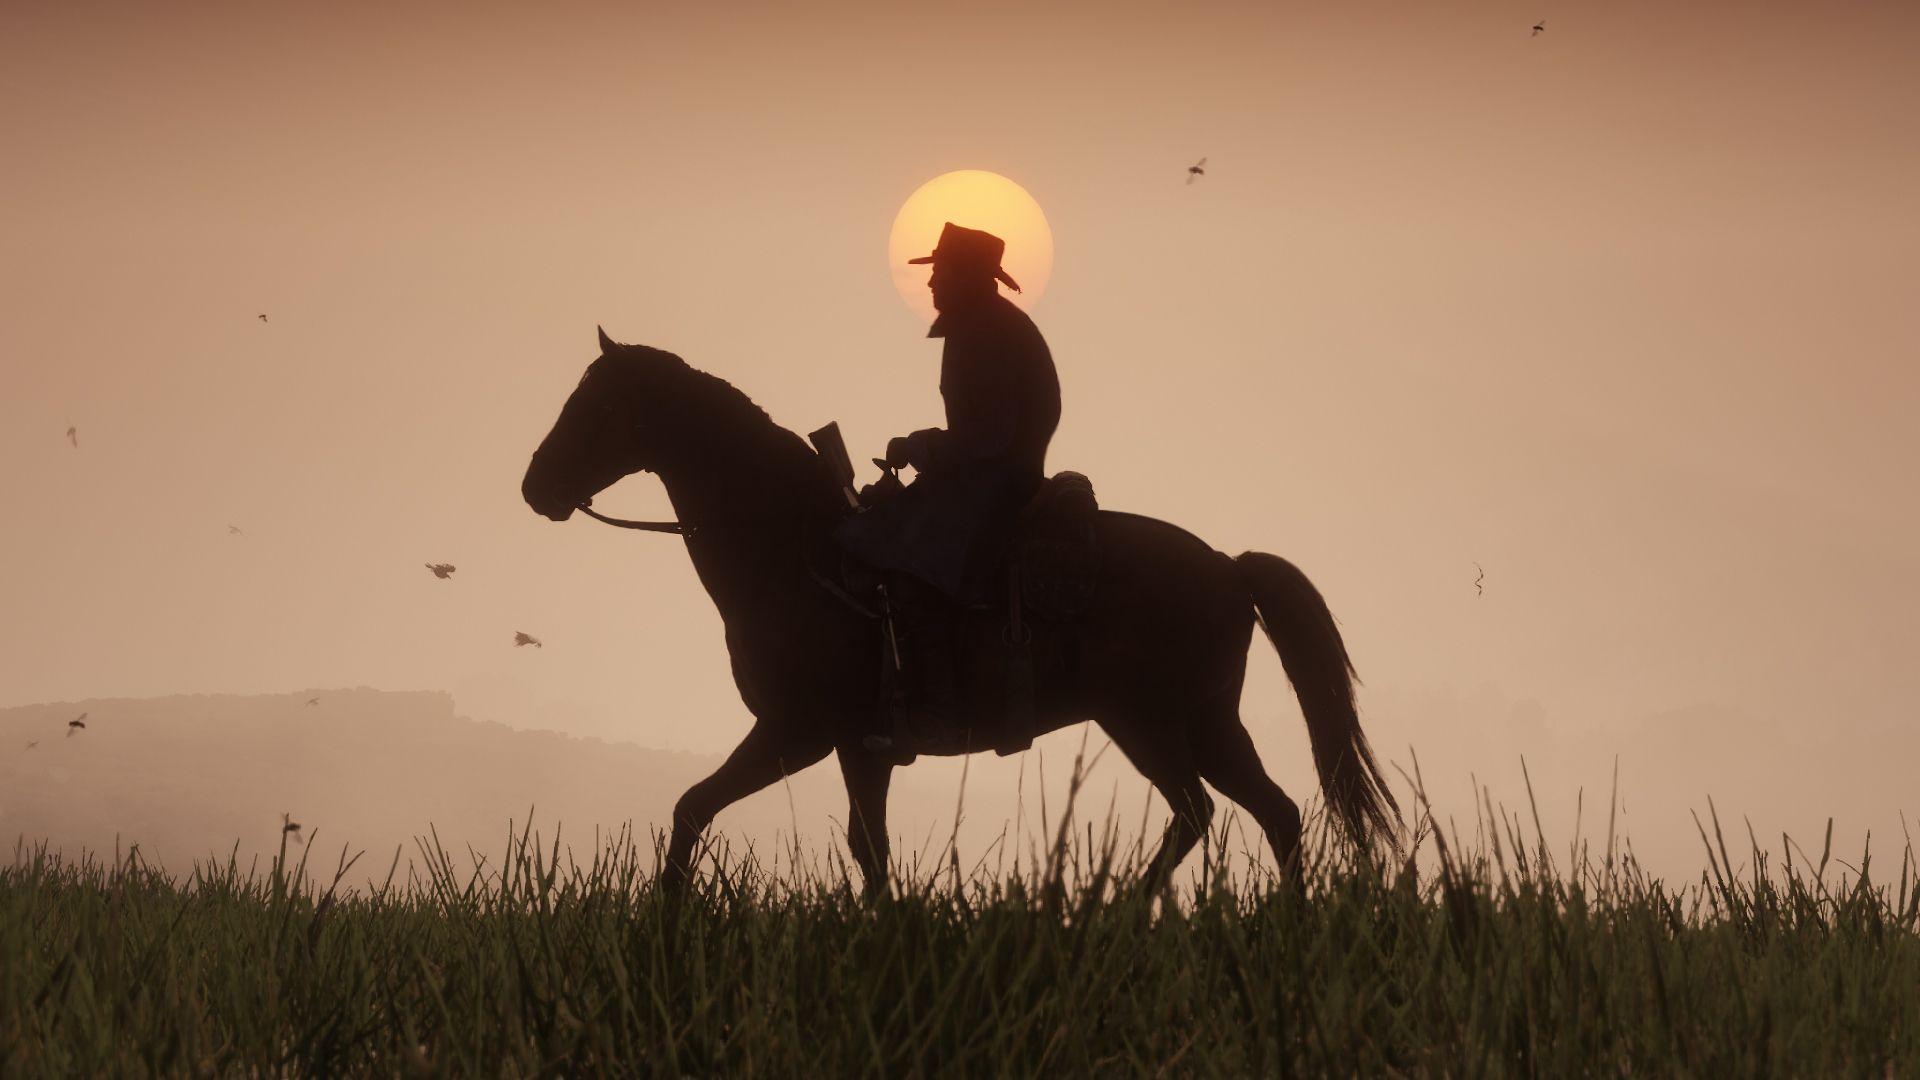 Red Dead Redemption 2 Gets New Frontier Towns And Cities Details, Art